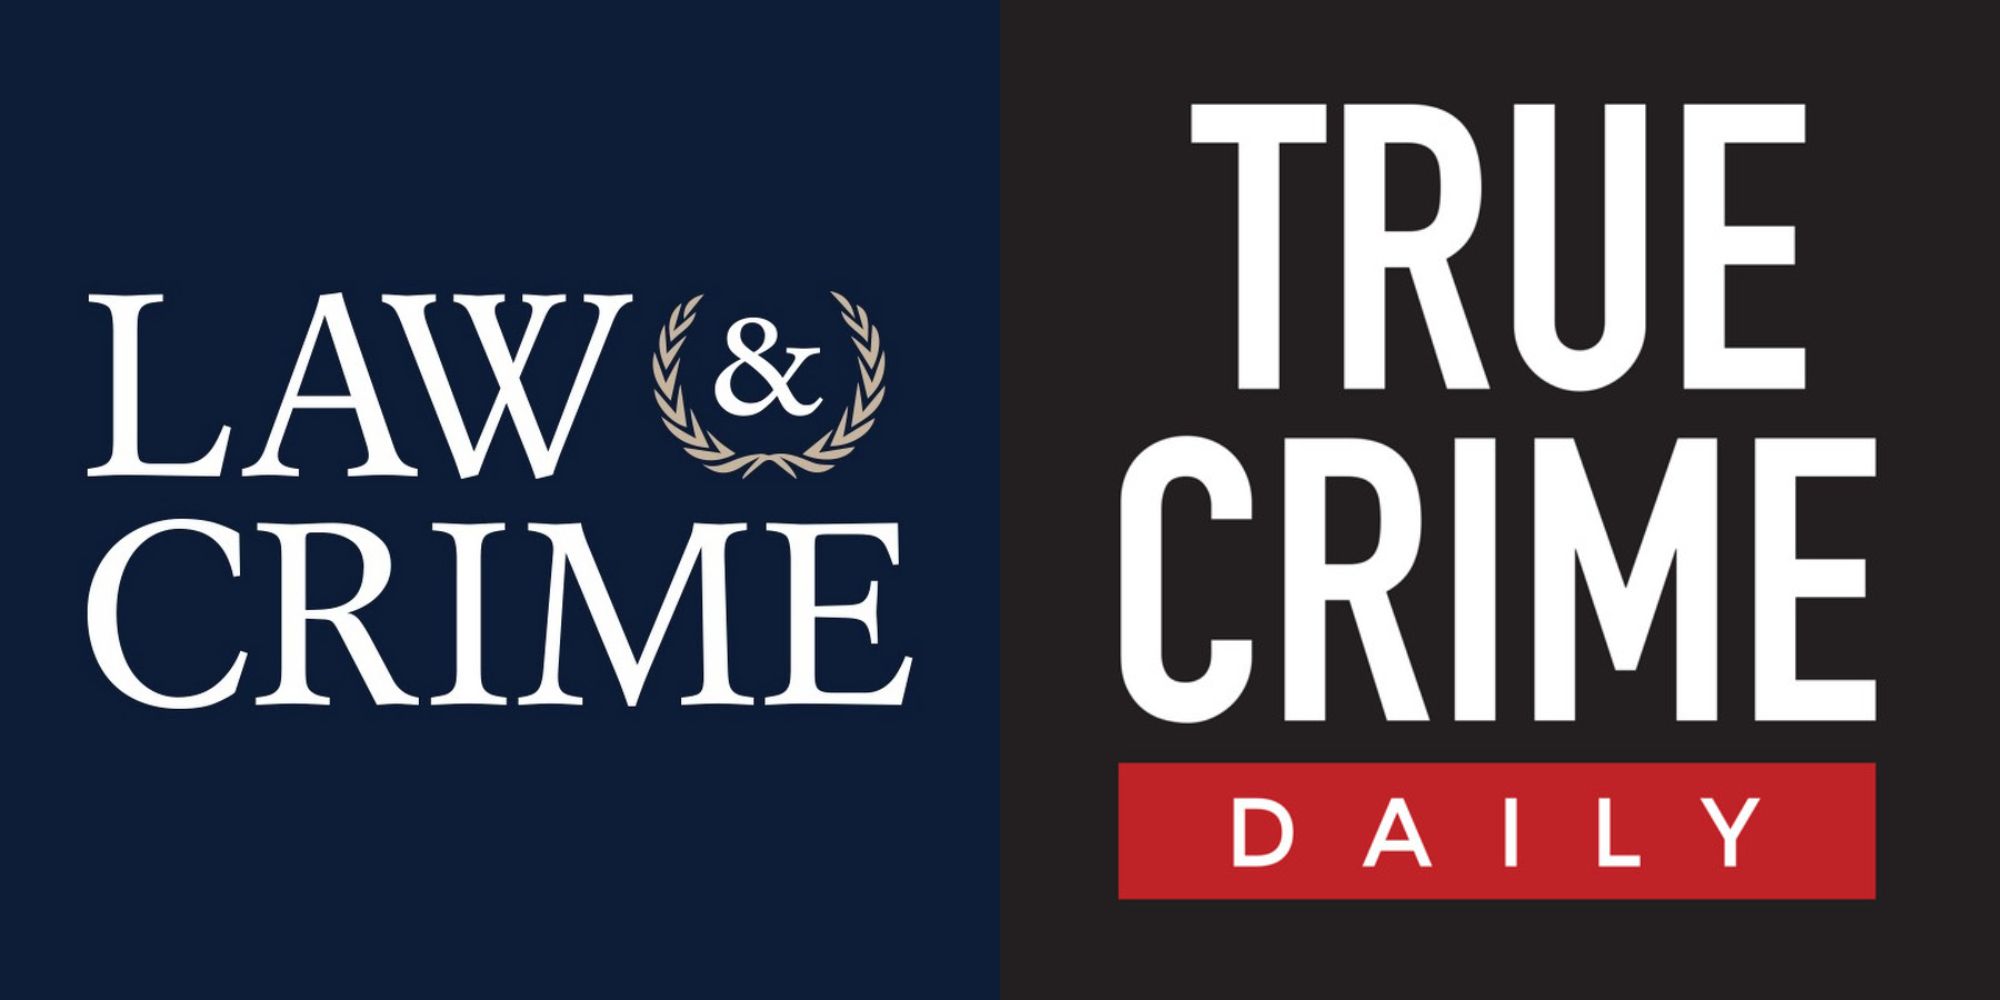 Split image showing the logos for the Law & Crime and True Crime Daily YouTube Channels